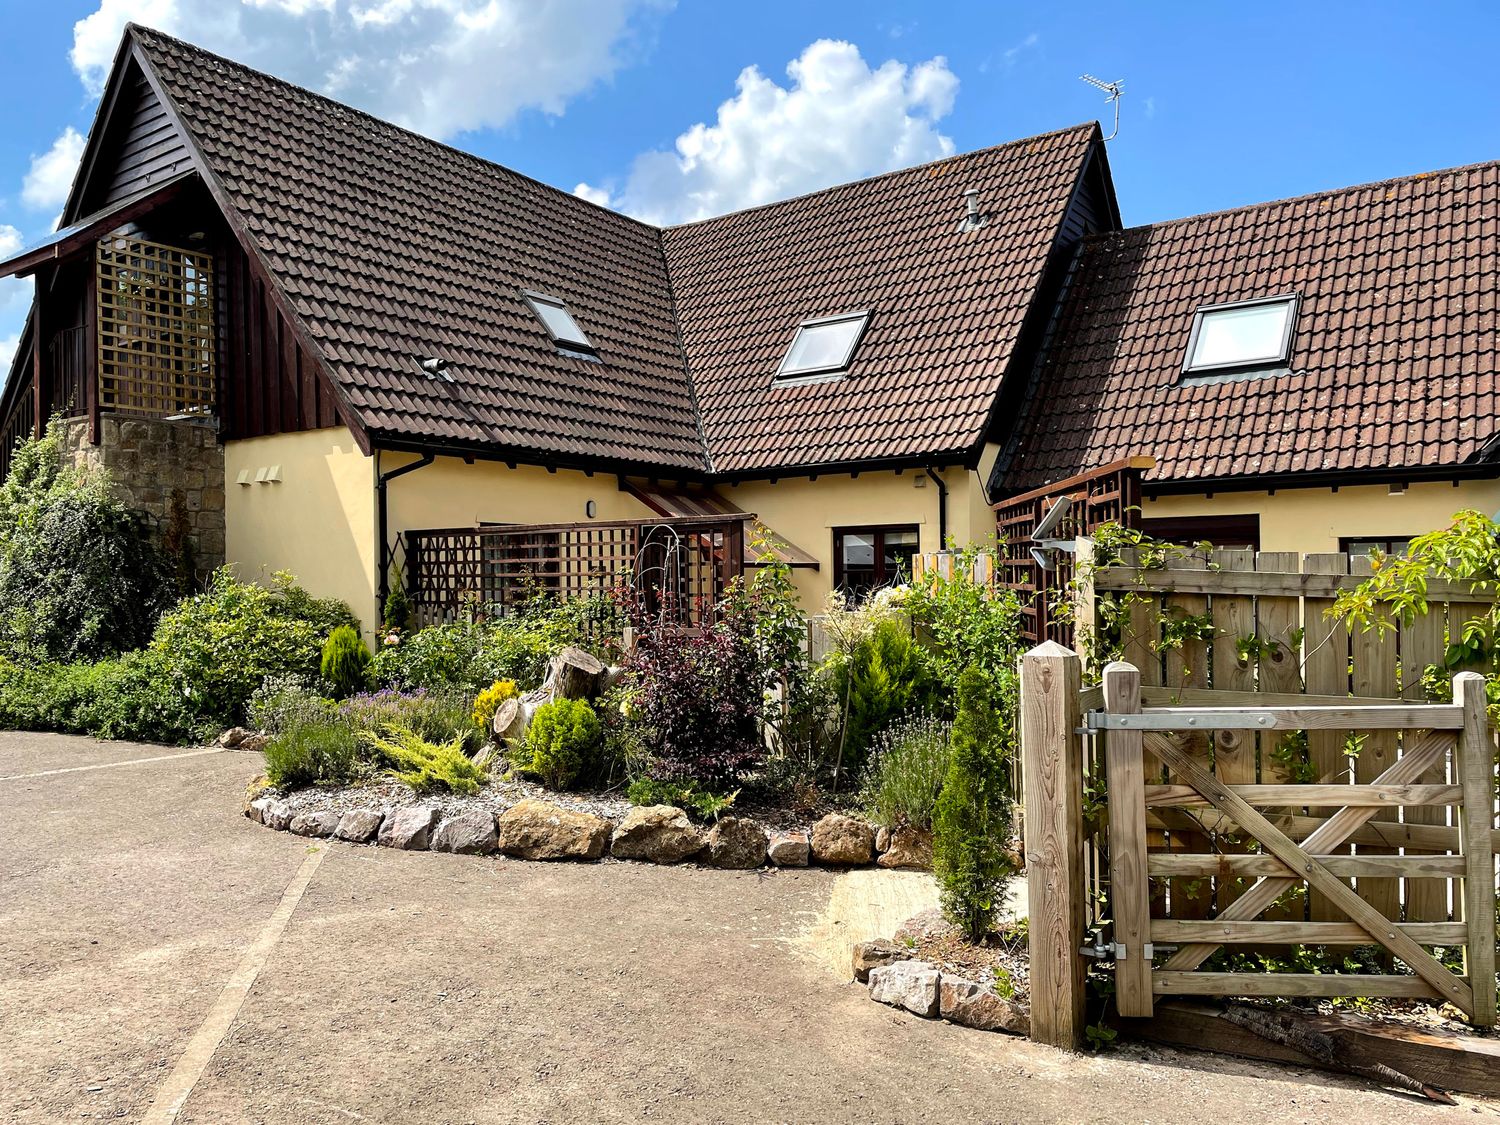 Stable Cottage, Shipham